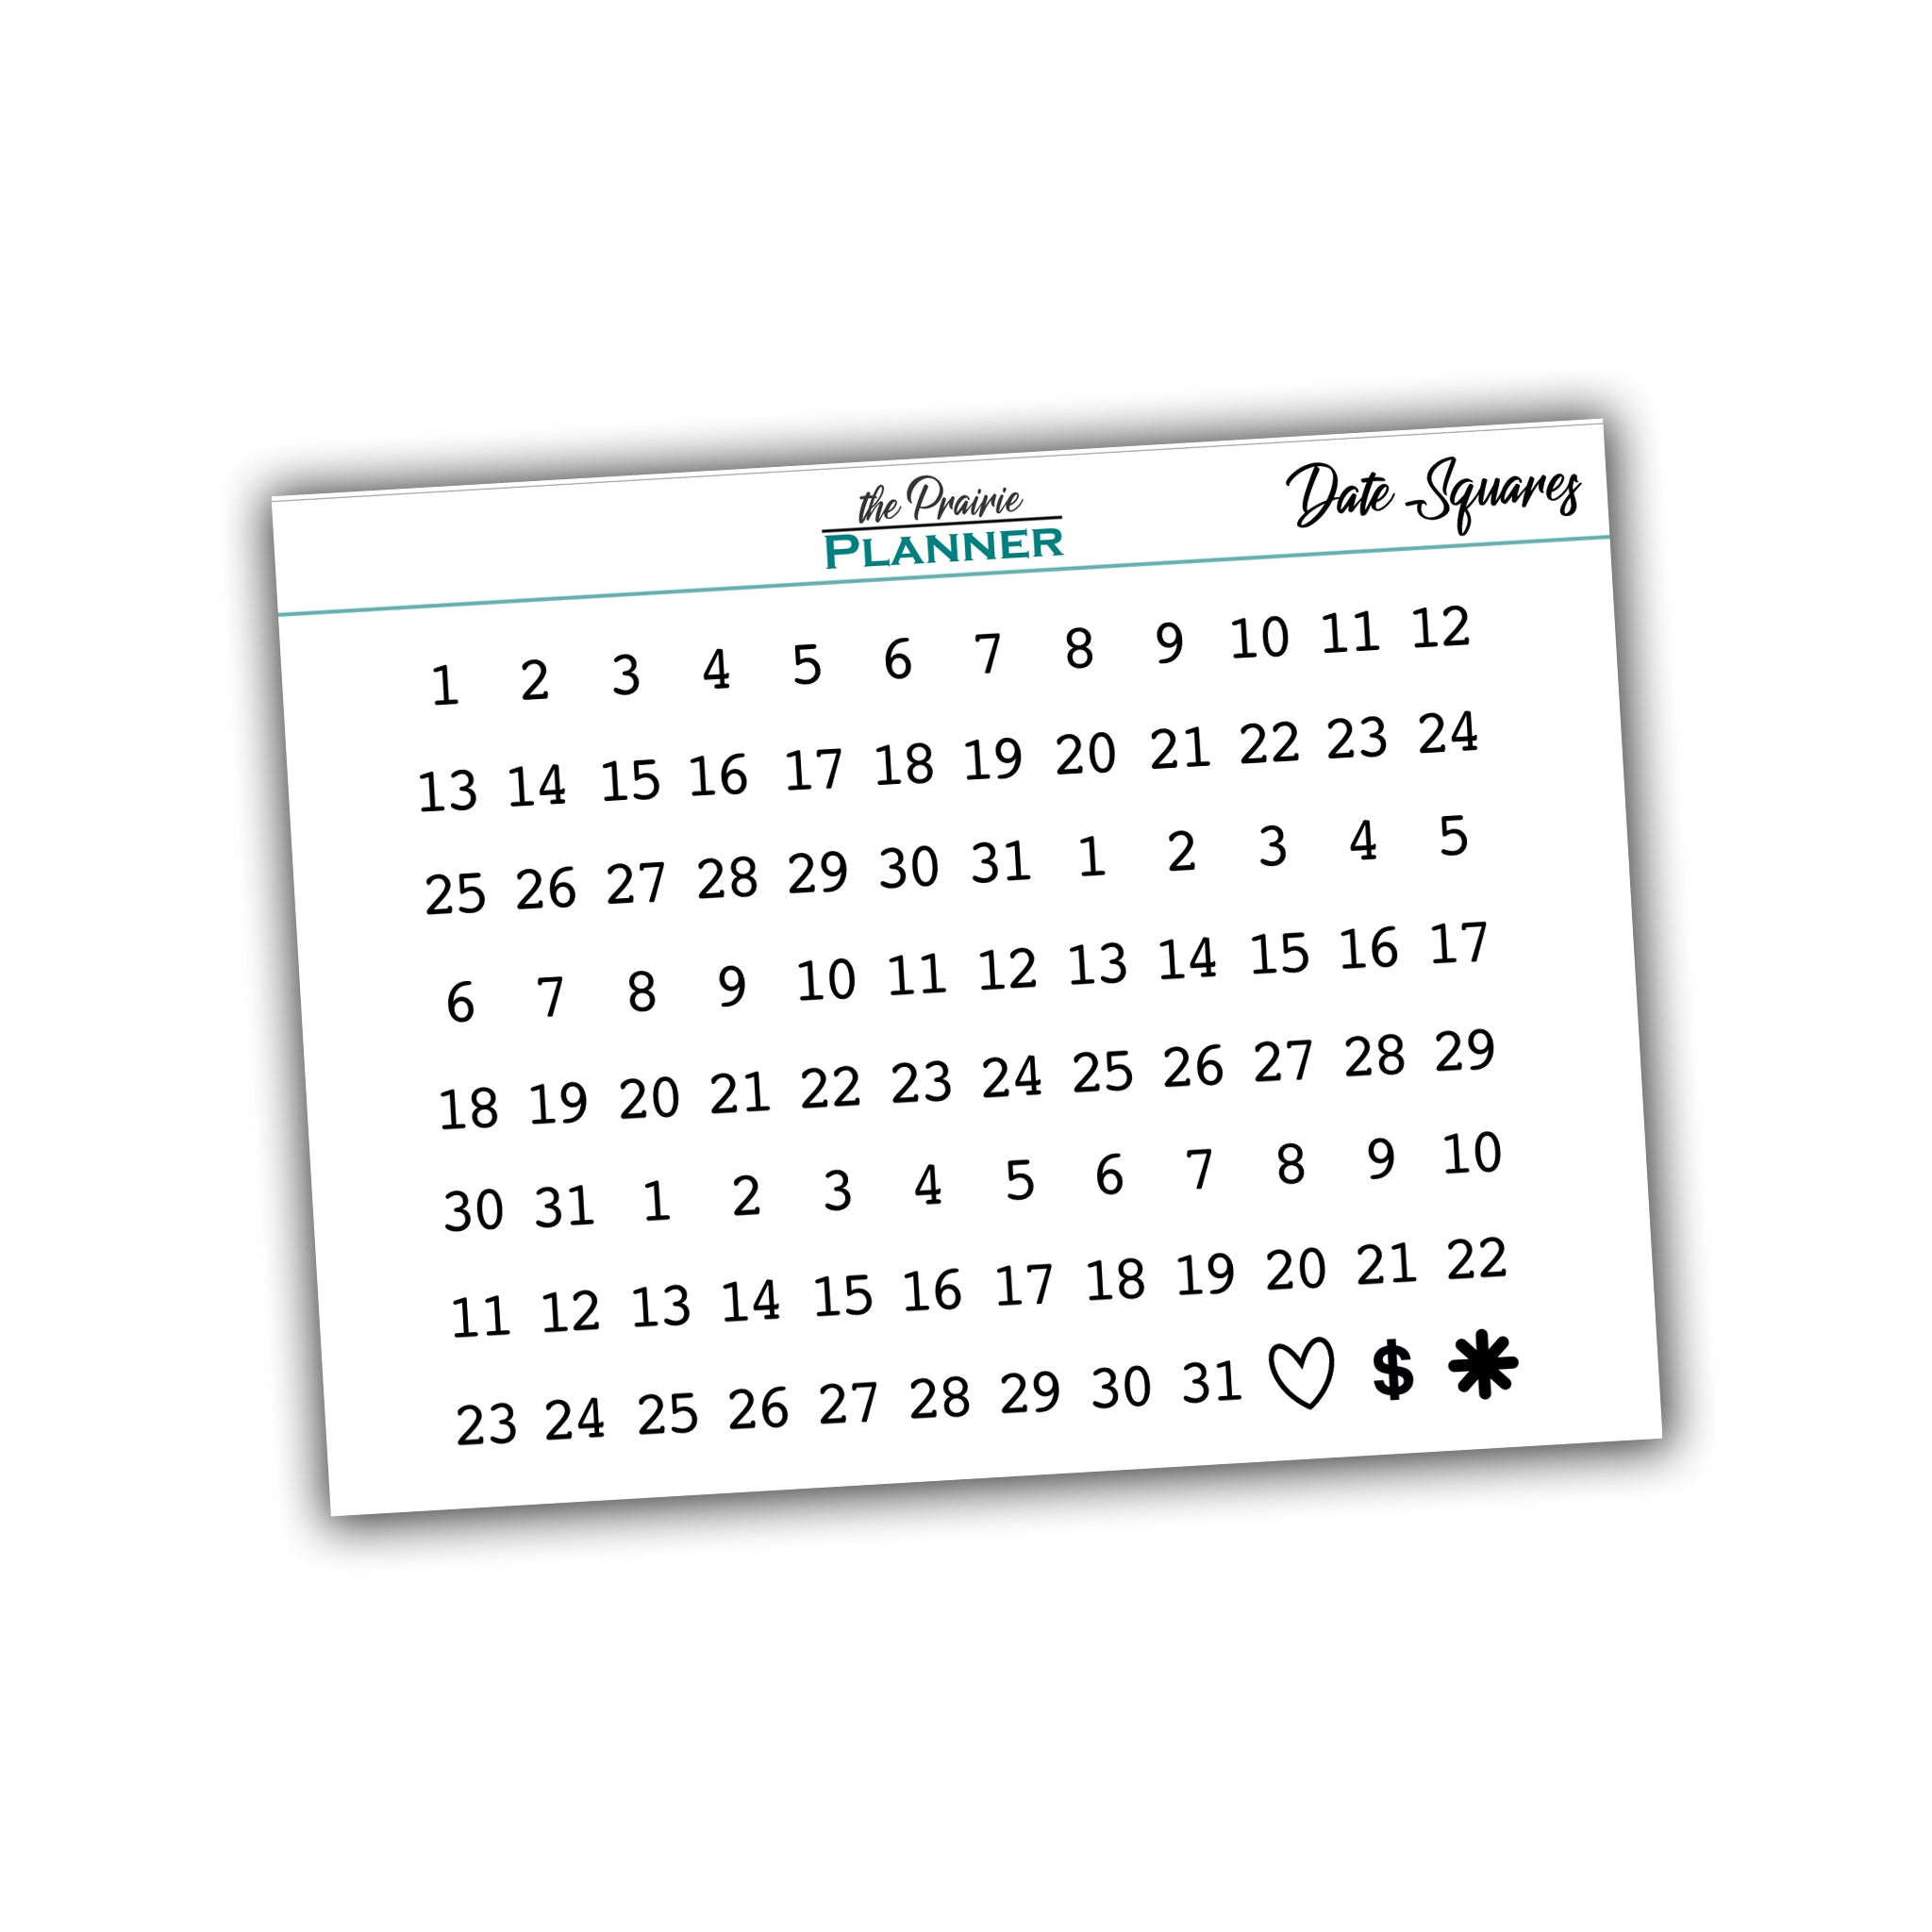 Date Squares - Planner Stickers